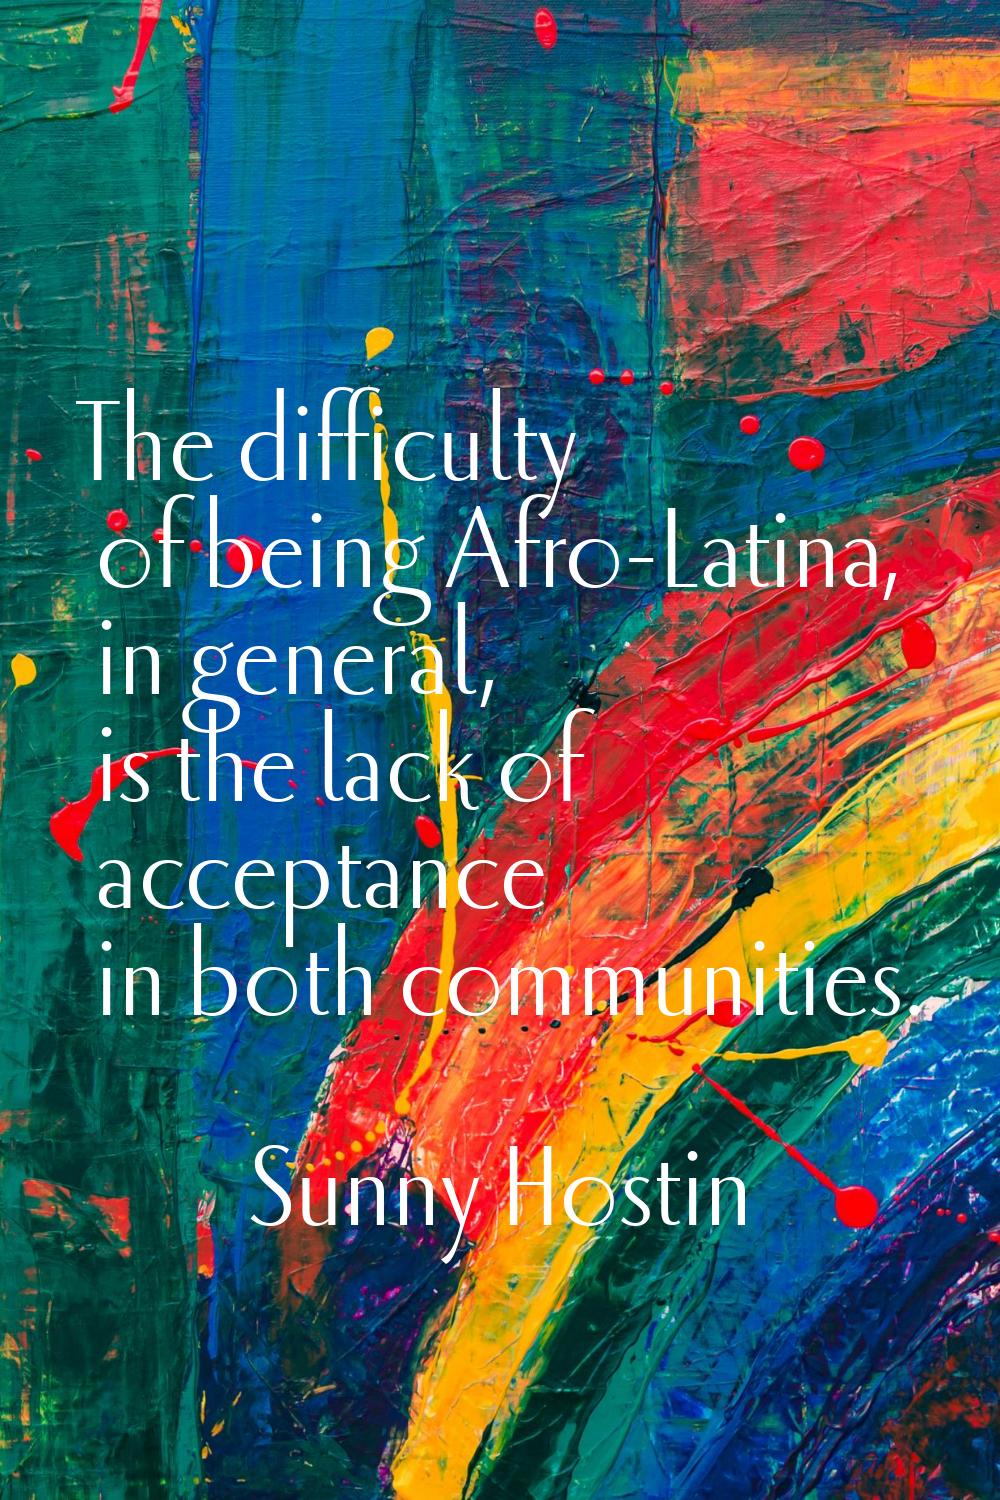 The difficulty of being Afro-Latina, in general, is the lack of acceptance in both communities.